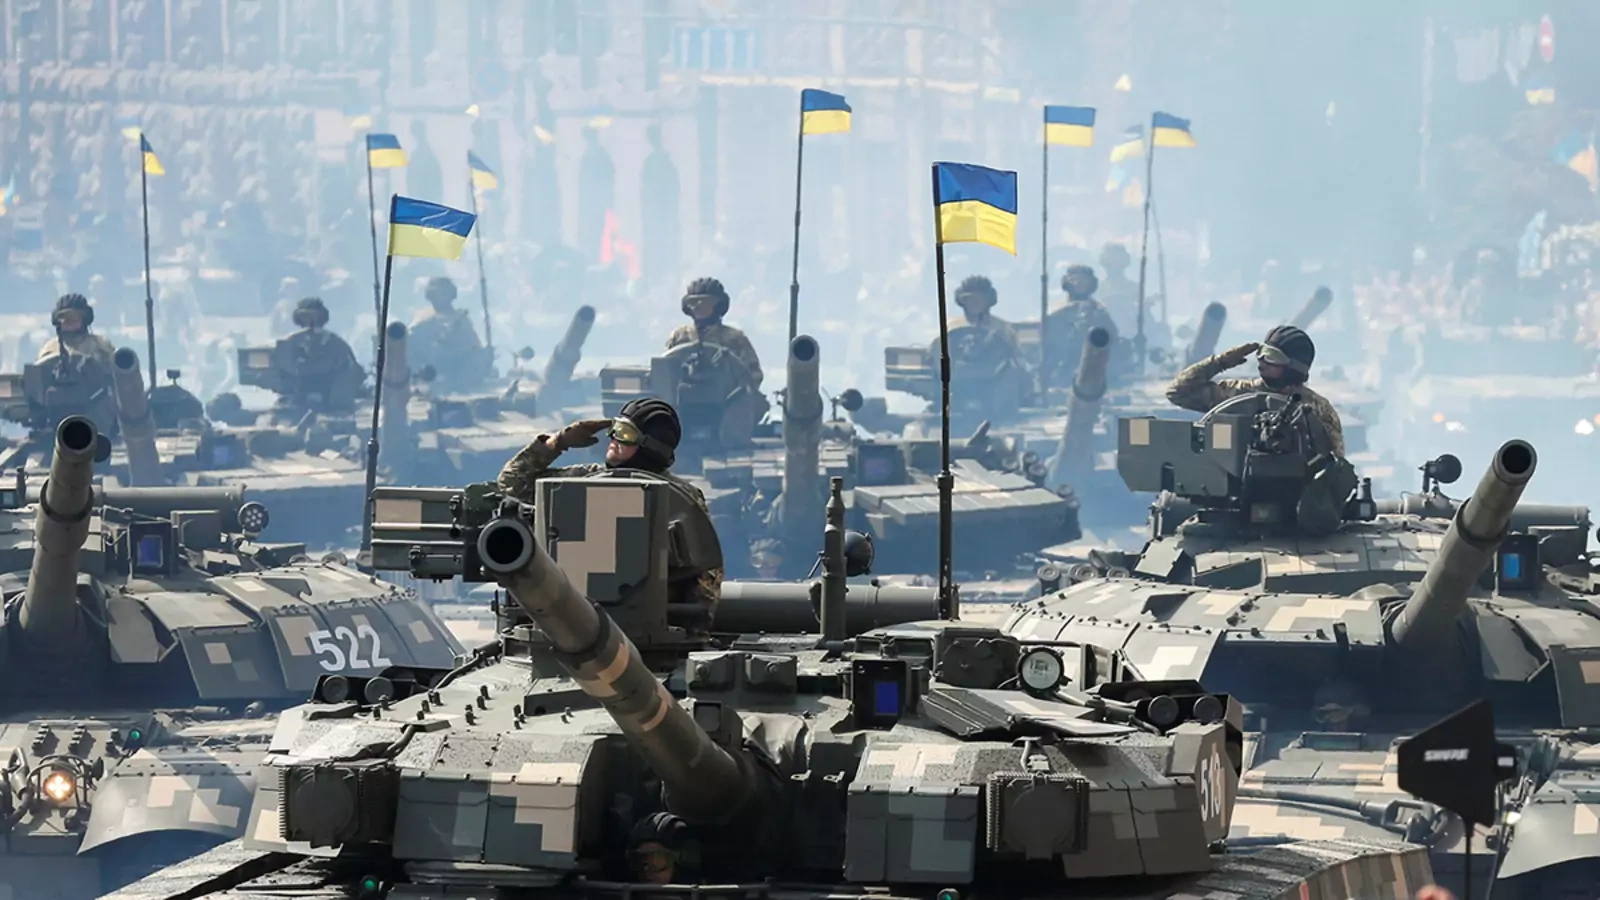 Ukrainian service members drive tanks during the Independence Day military parade in Kyiv, Ukraine, in August 2021.